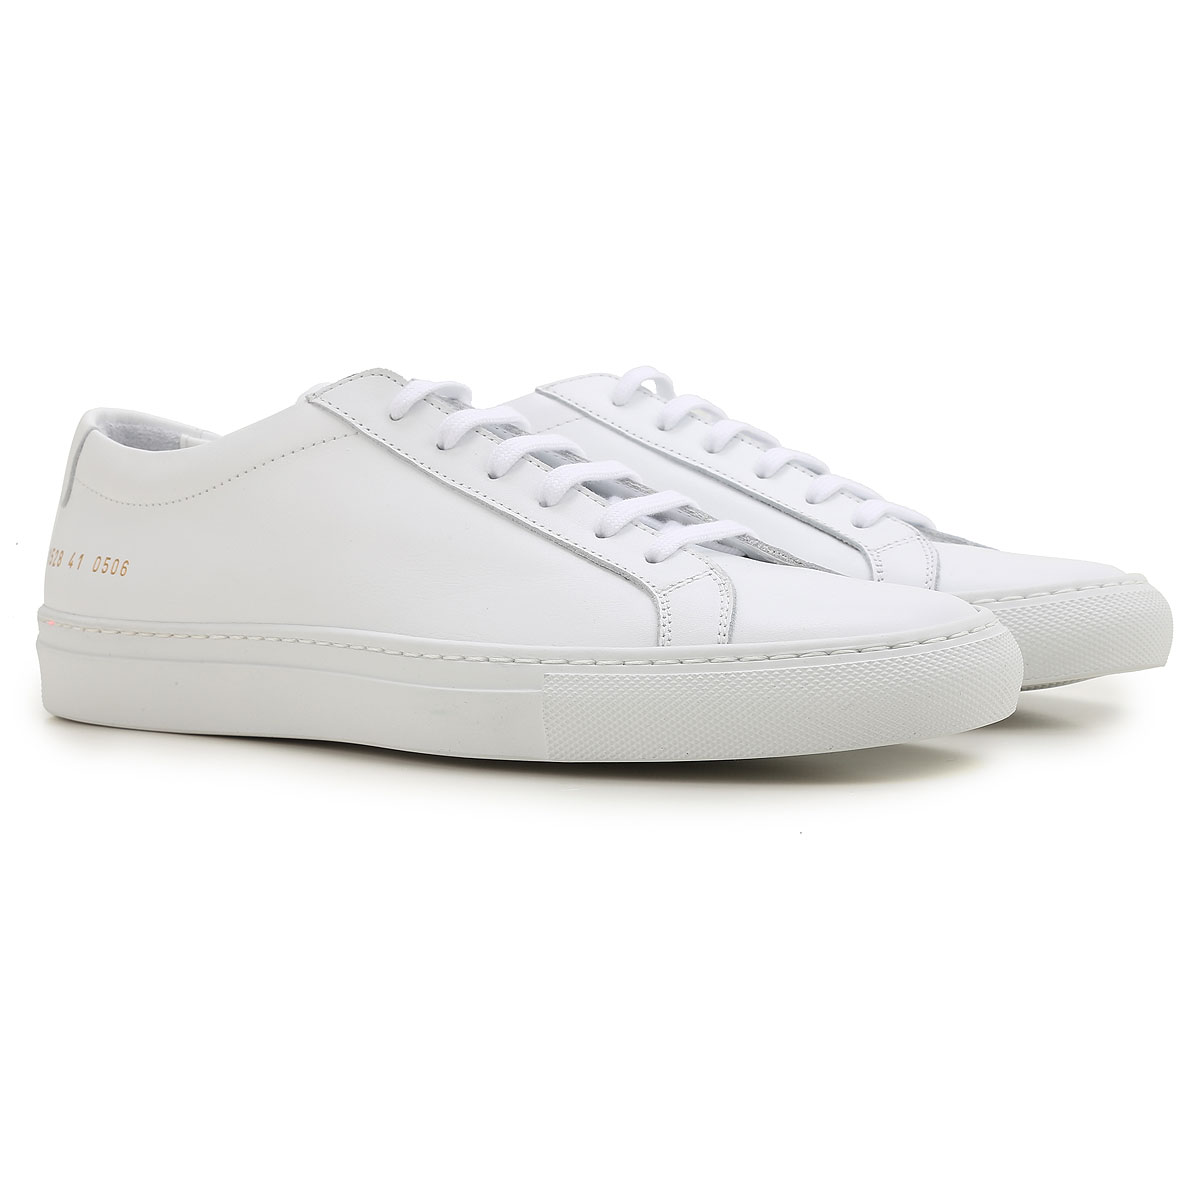 Mens Shoes Common Projects, Style code: 1528-0506-